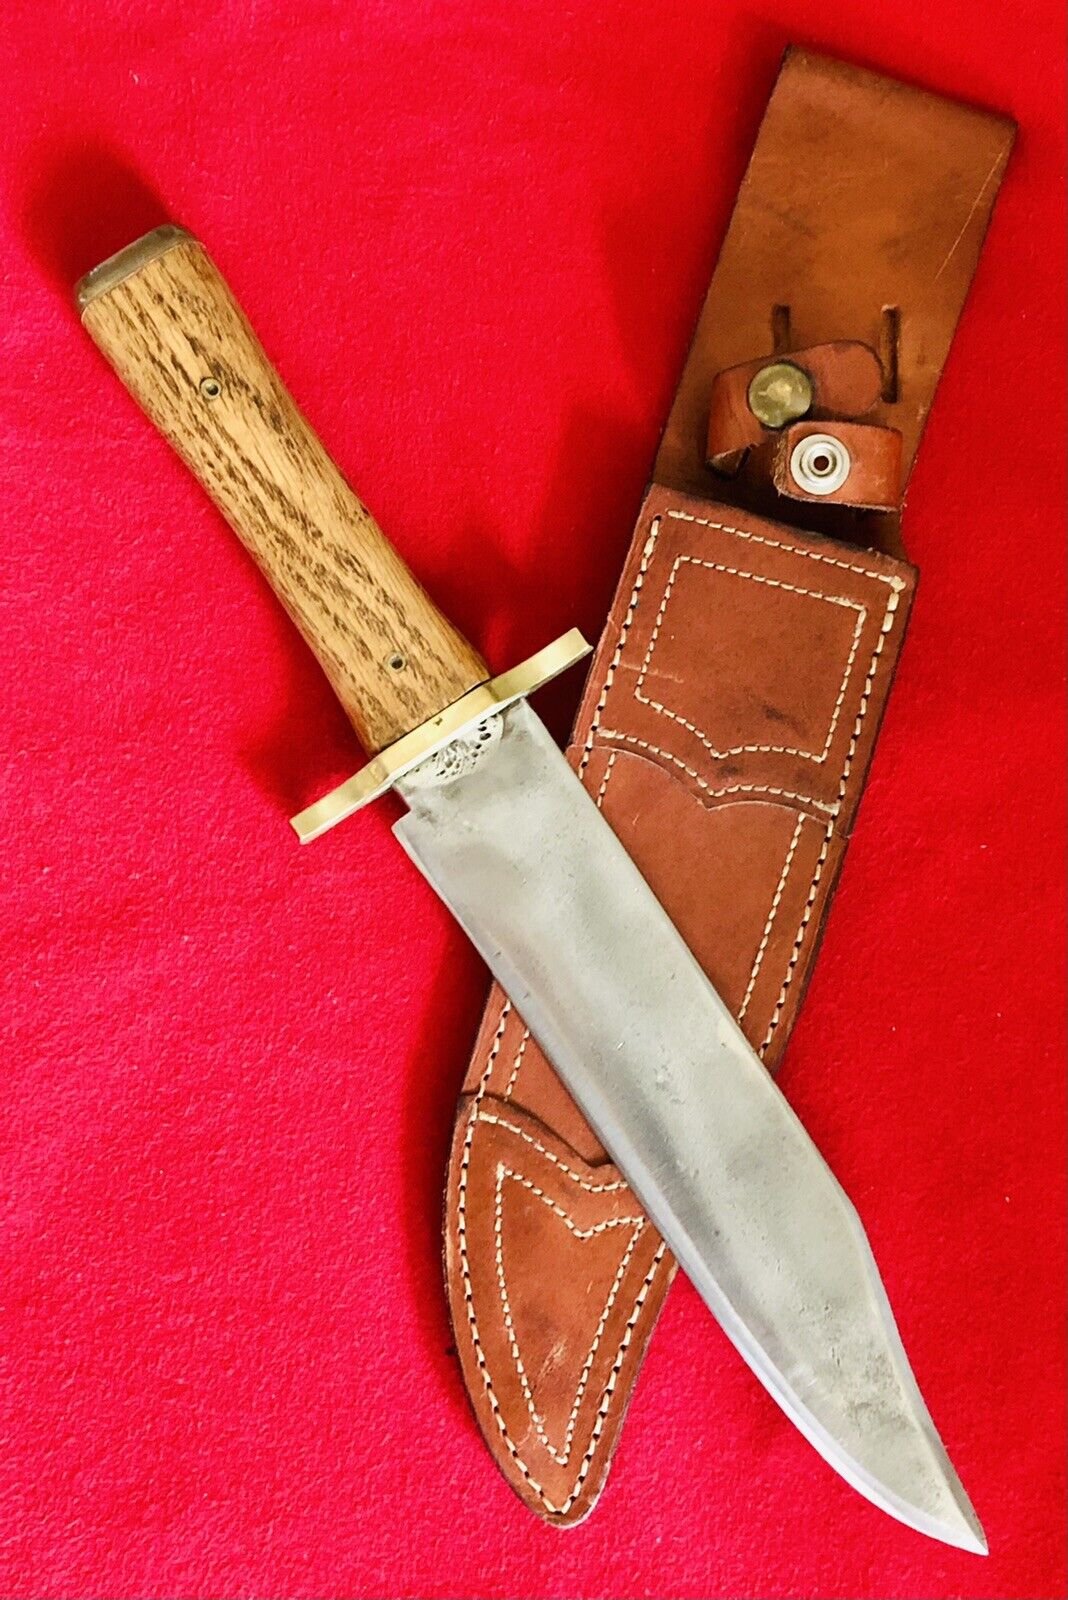 BOWIE KNIFE MADE FROM VINTAGE BLADE OR SWORD & KERSHAW 4072 SHEATH (8.75”) BLADE